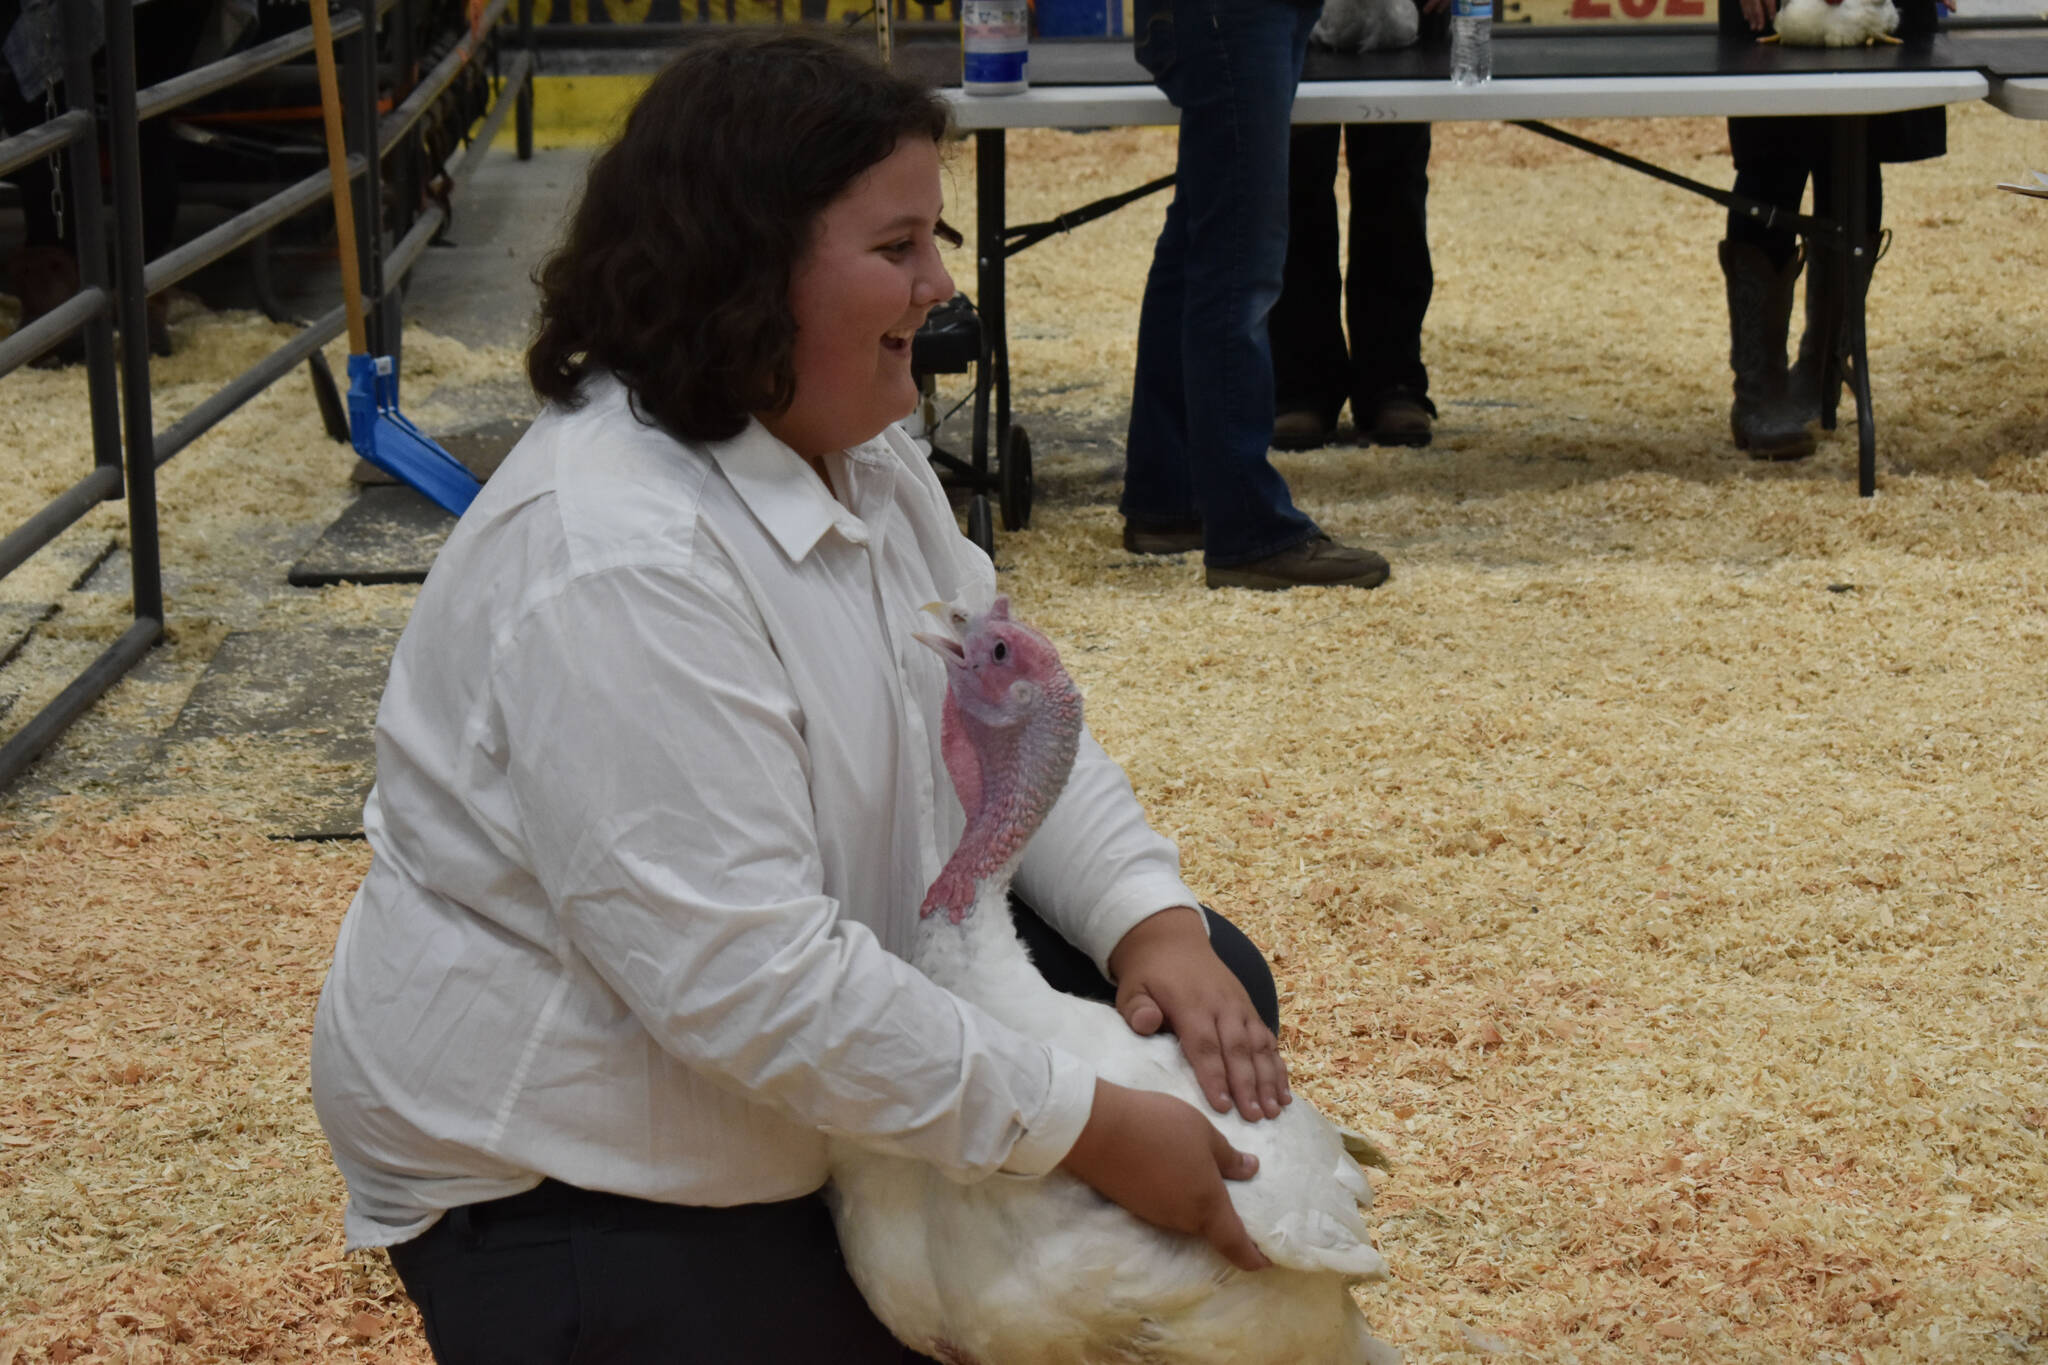 Levi Rankin shows a turkey at the 4-H Agriculture Expo in Soldotna, Alaska, on Aug. 5, 2022. Rankin was named Grand Champion in showmanship for this turkey showing. (Jake Dye/Peninsula Clarion)